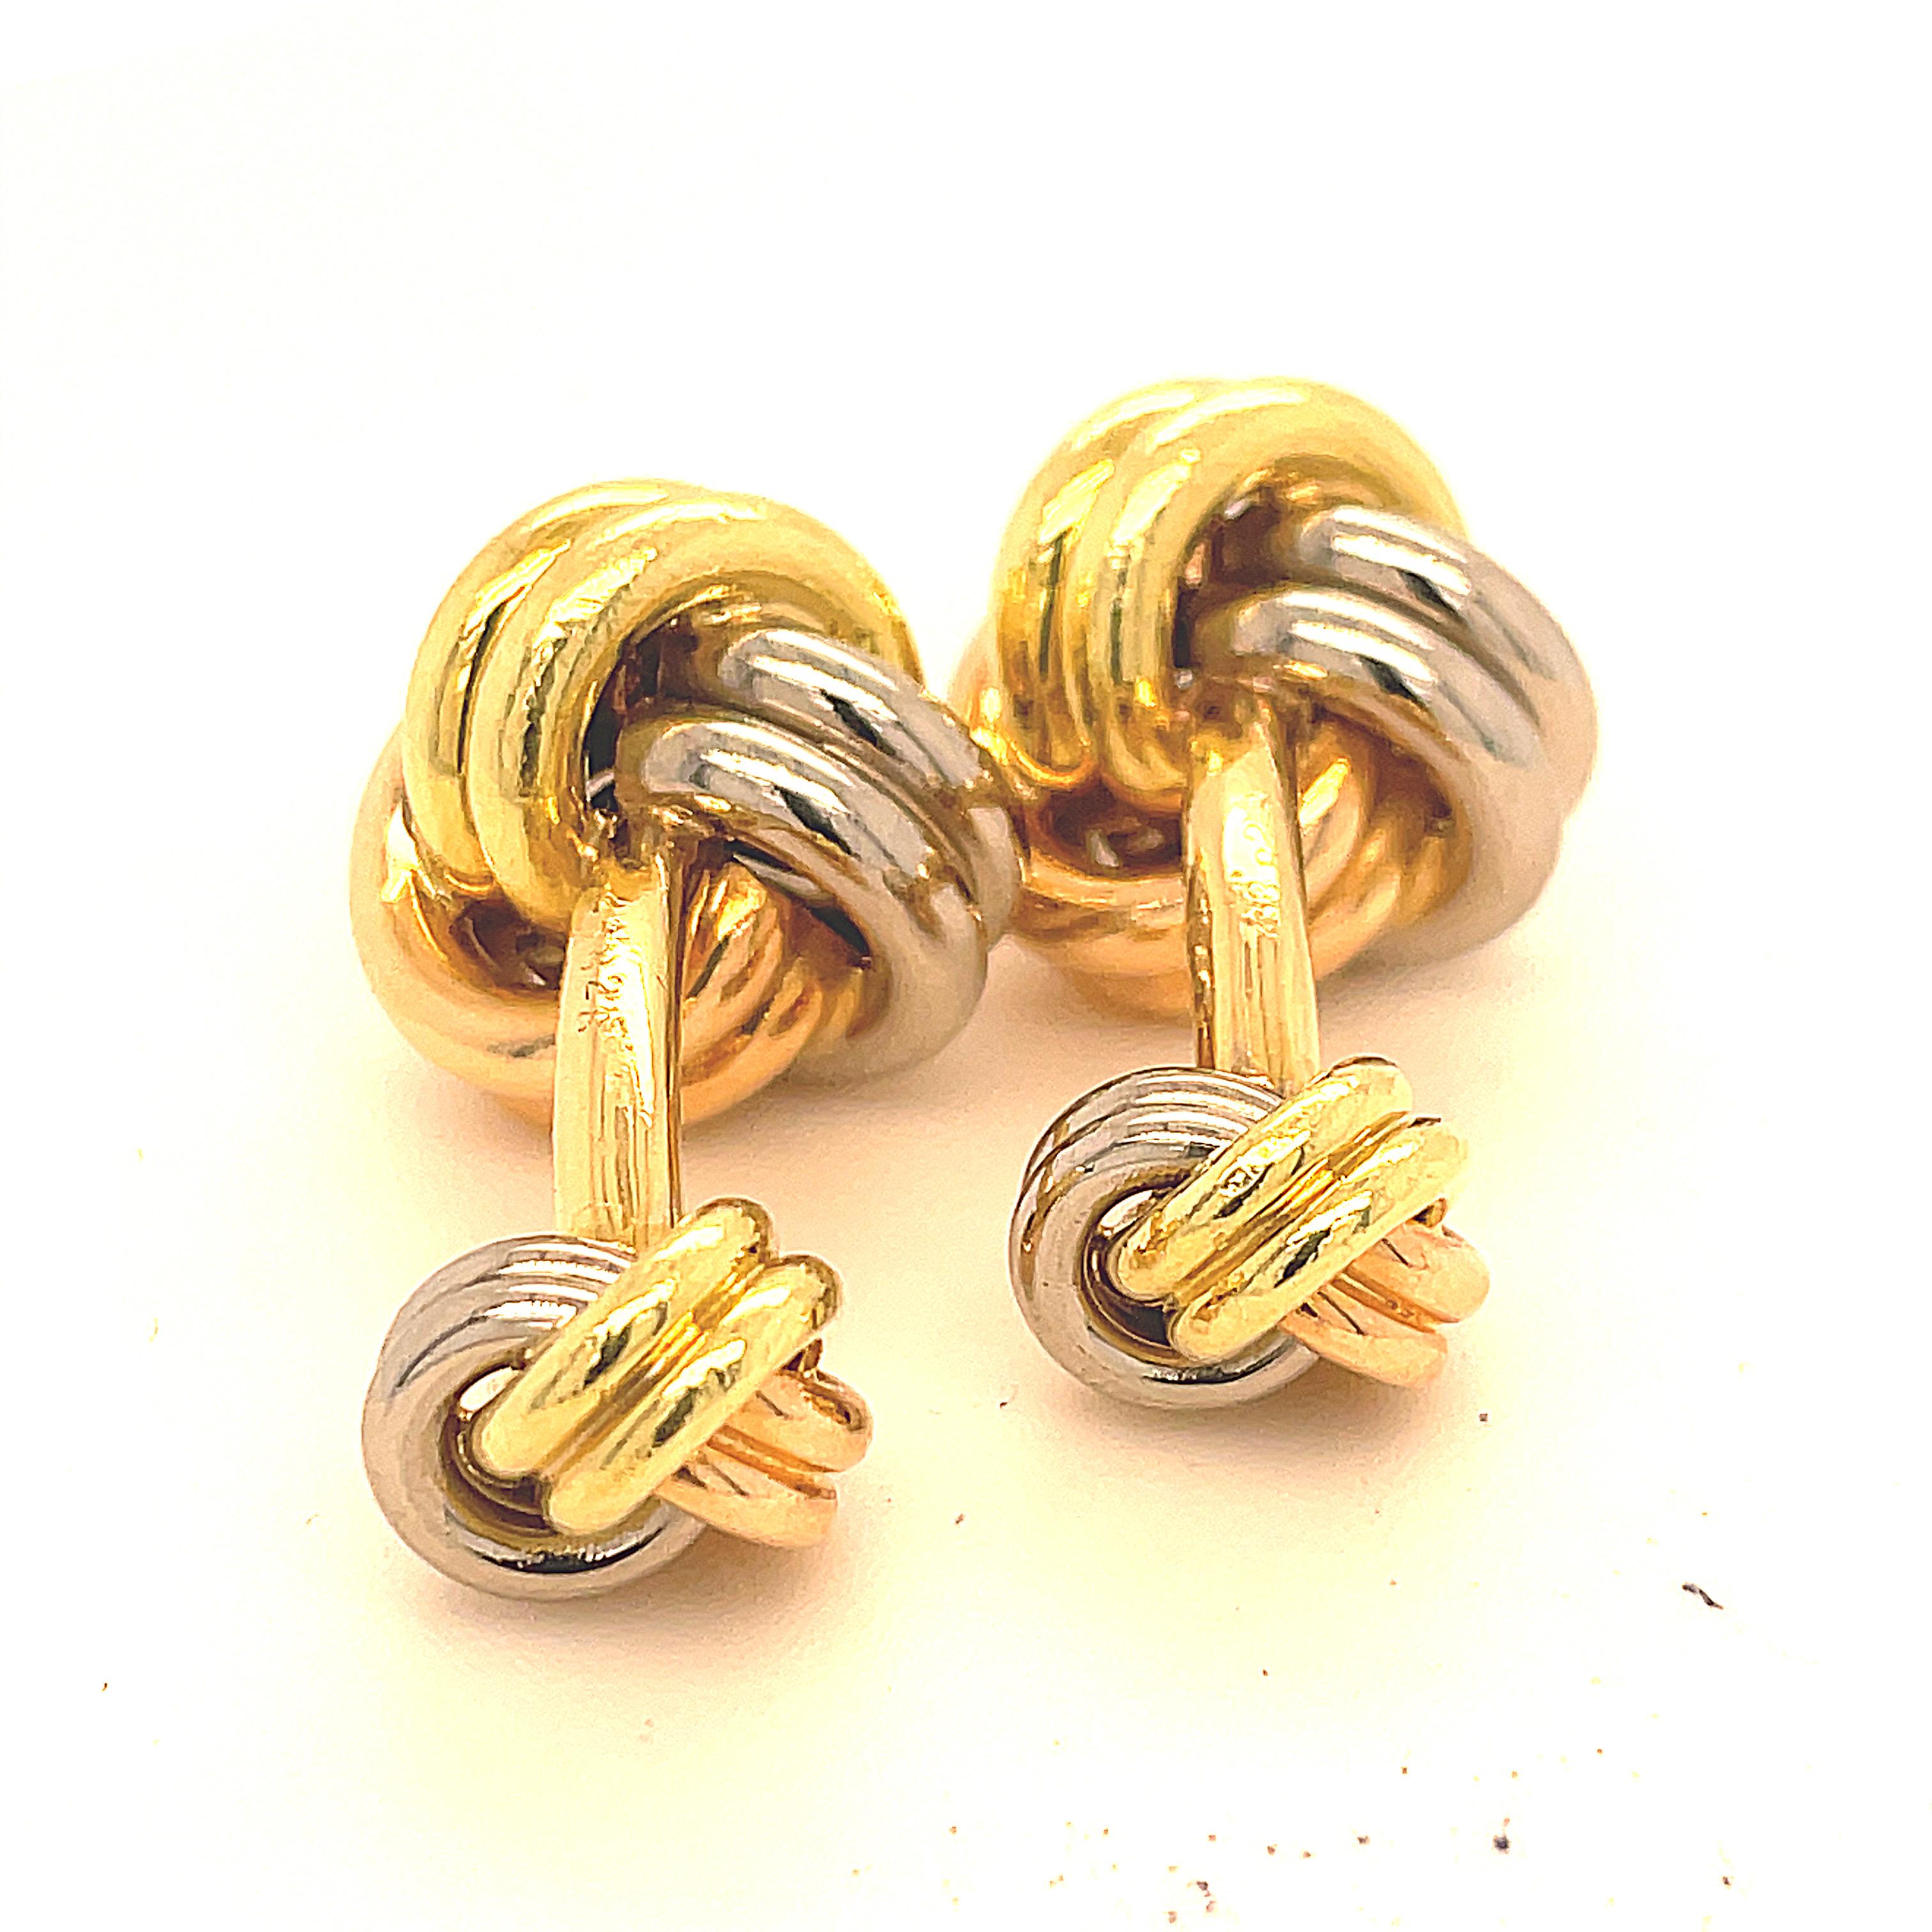 Super size Trinity knot cufflinks.  Made, signed and numbered by CARTIER.   Rose, yellow and white 18K gold.  Large knot in front and smaller knot on the reverse.  
2/3